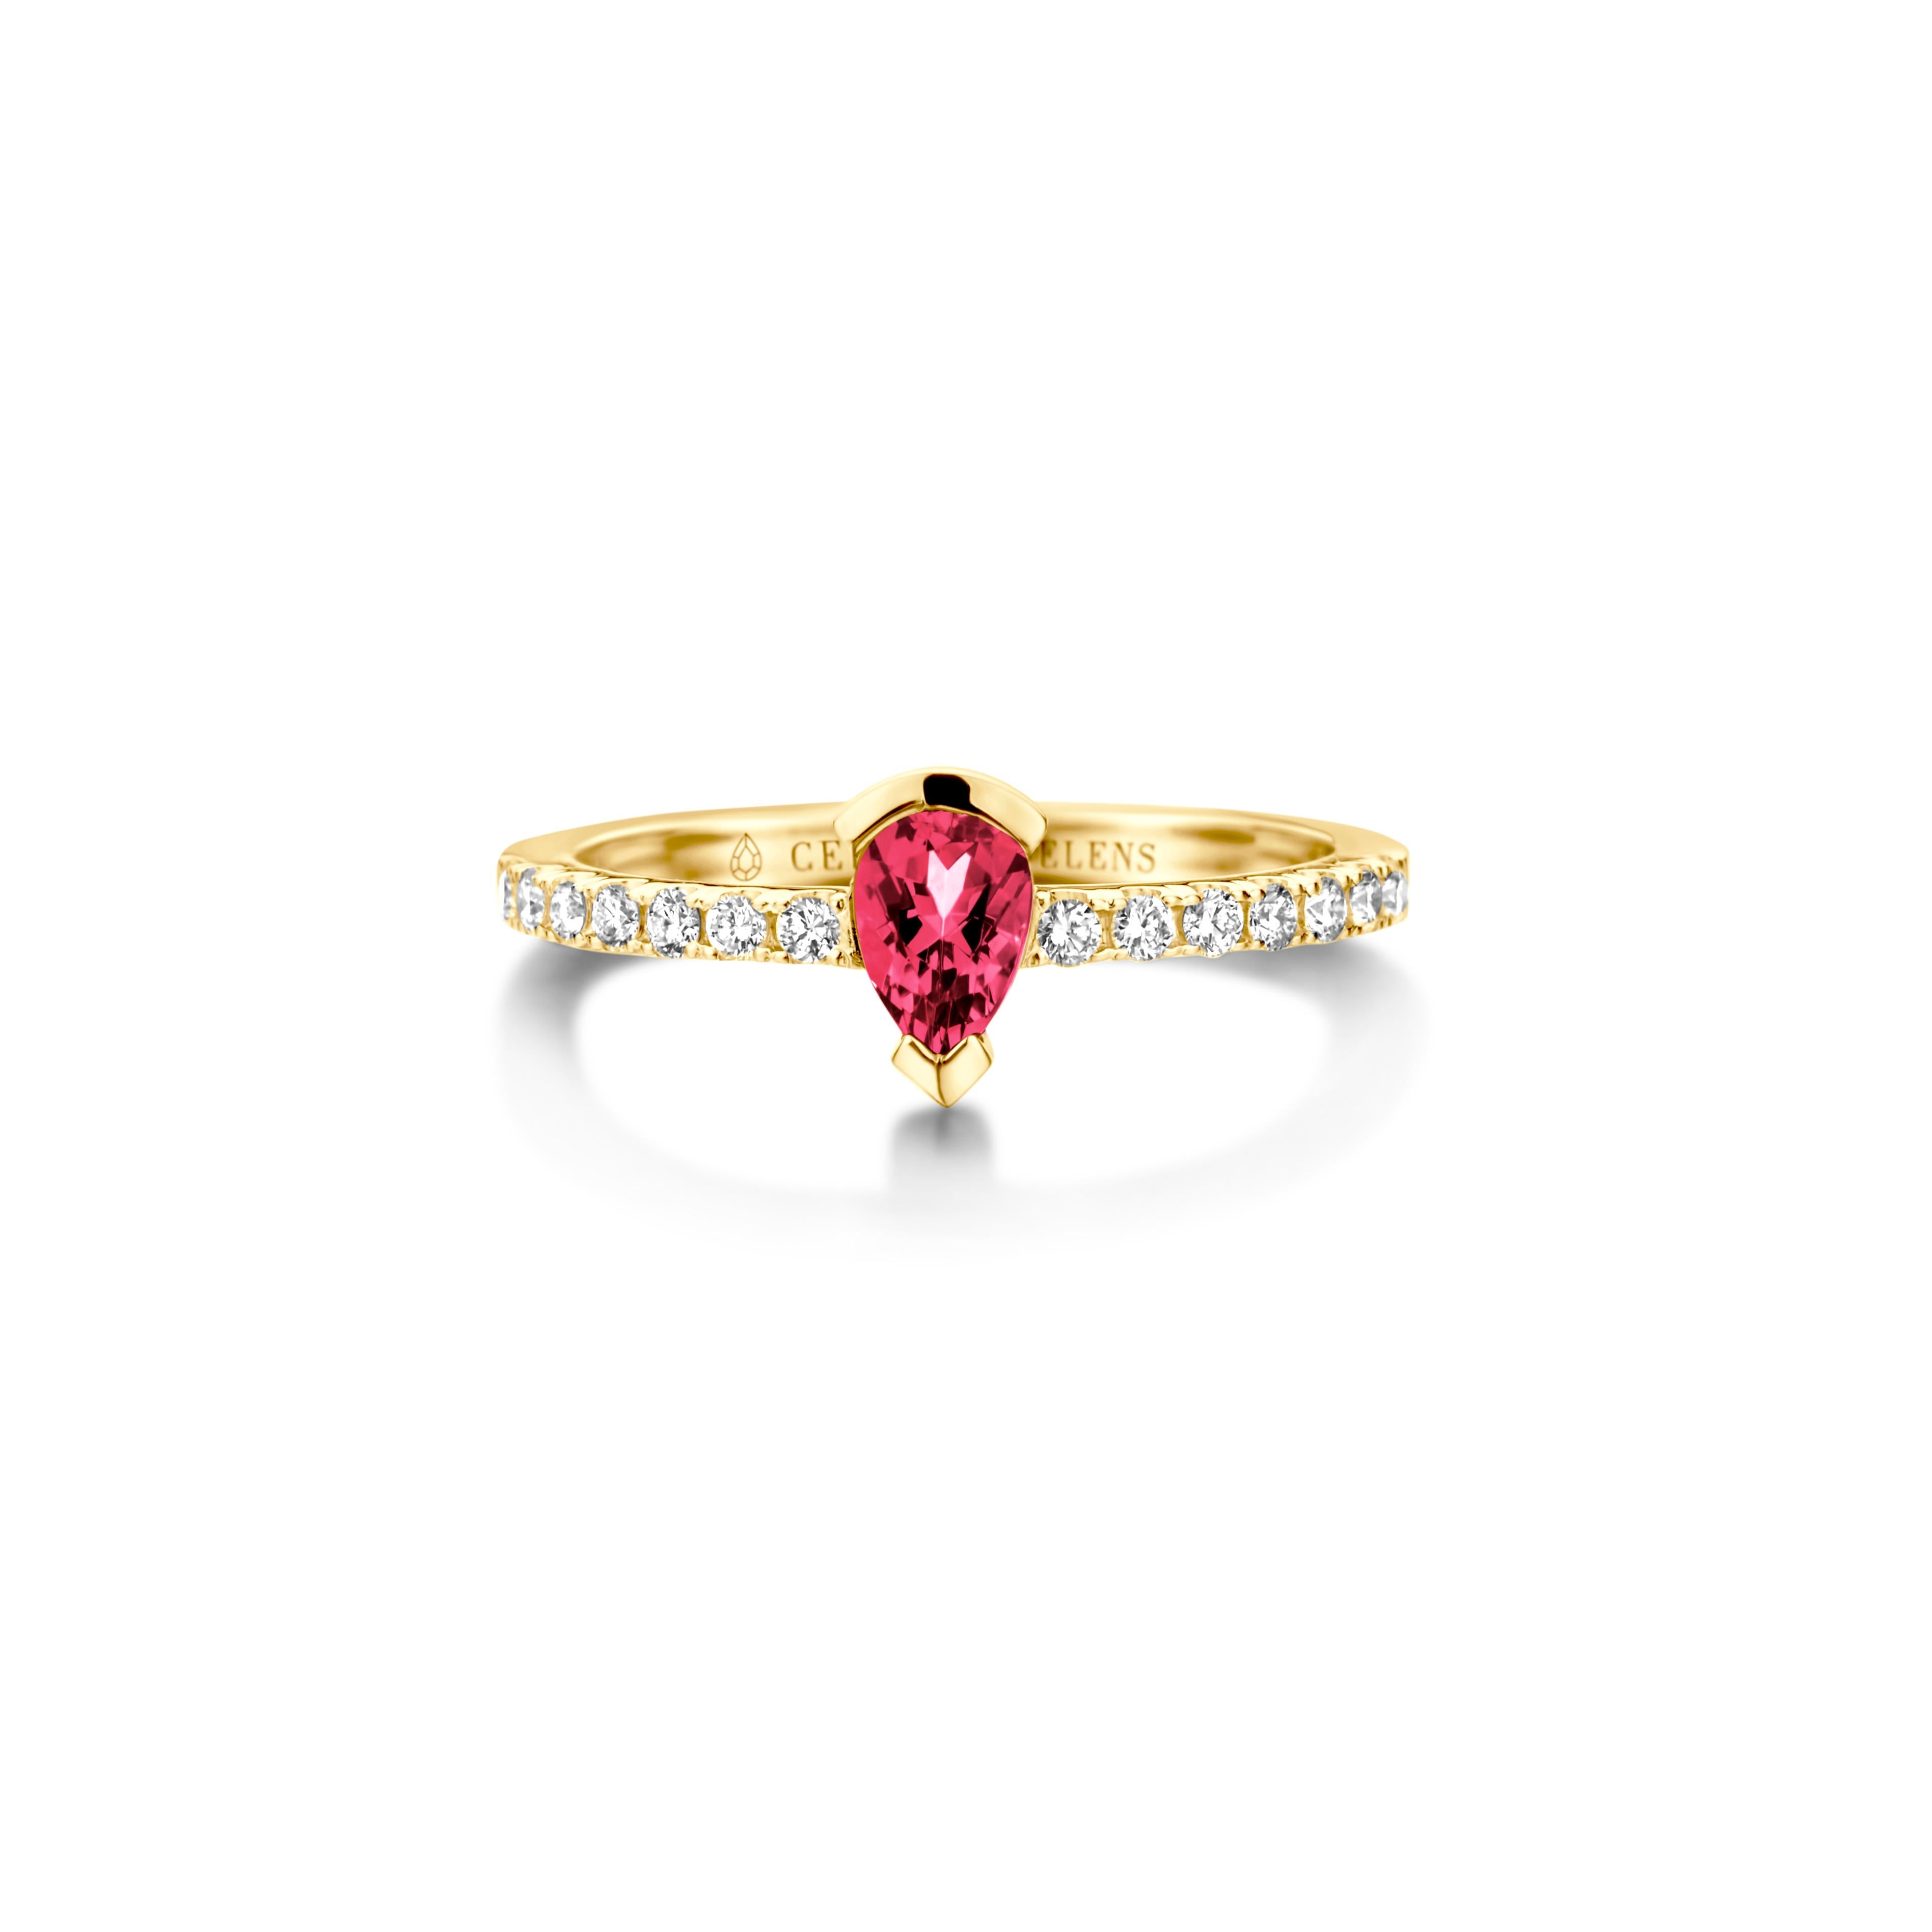 Adeline Straight ring in 18Kt white gold set with a pear-shaped rubelite and 0,24 Ct of white brilliant cut diamonds - VS F quality. Also, available in yellow gold and white gold. Celine Roelens, a goldsmith and gemologist, is specialized in unique,